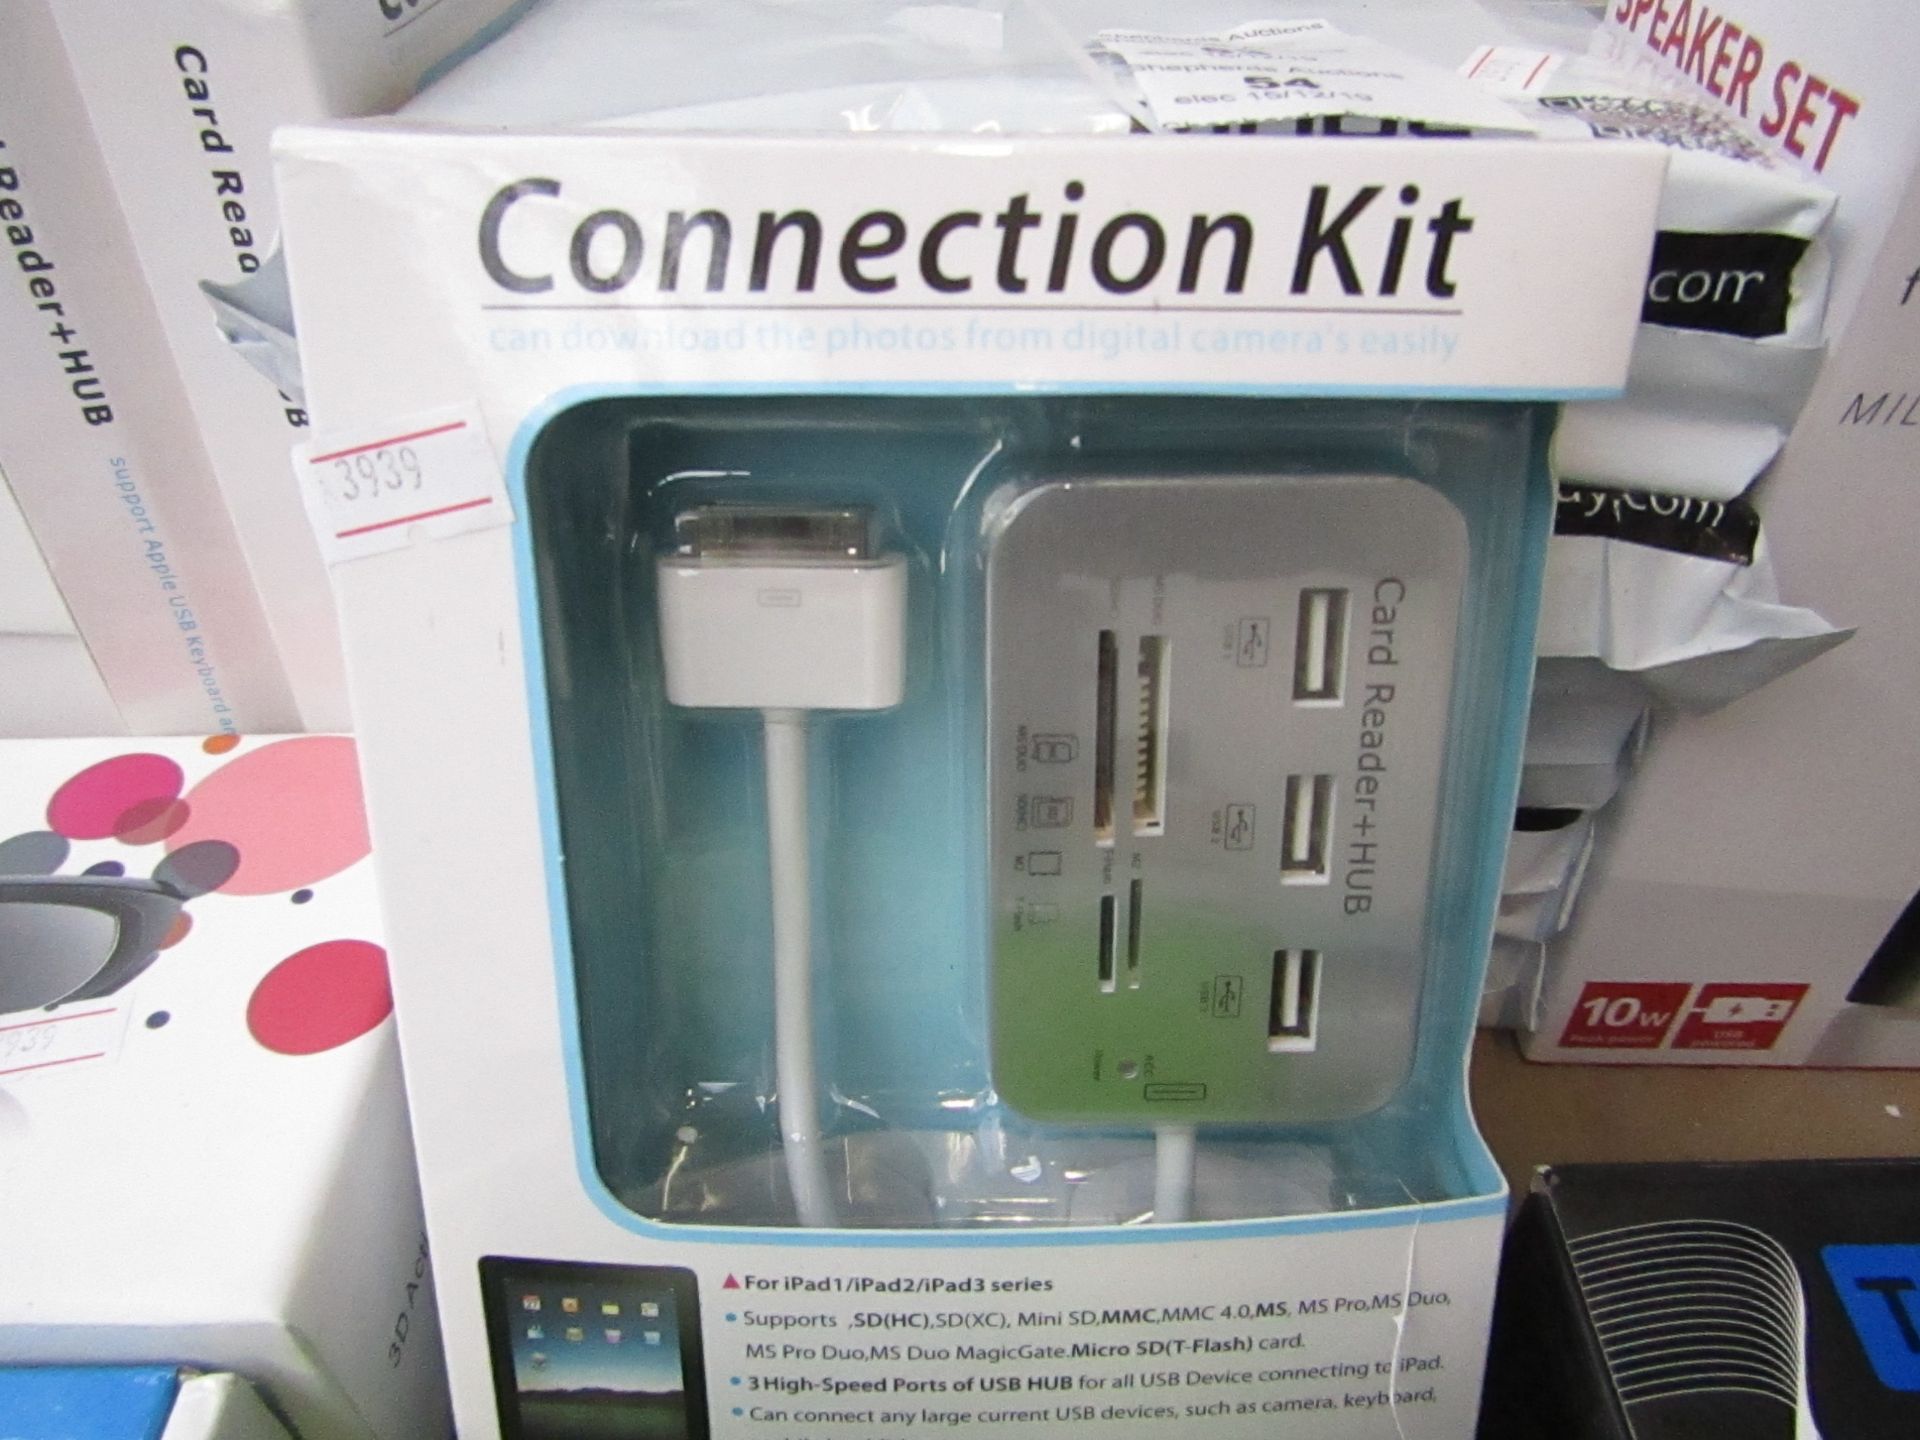 Multi-functional connection kit, new and boxed.